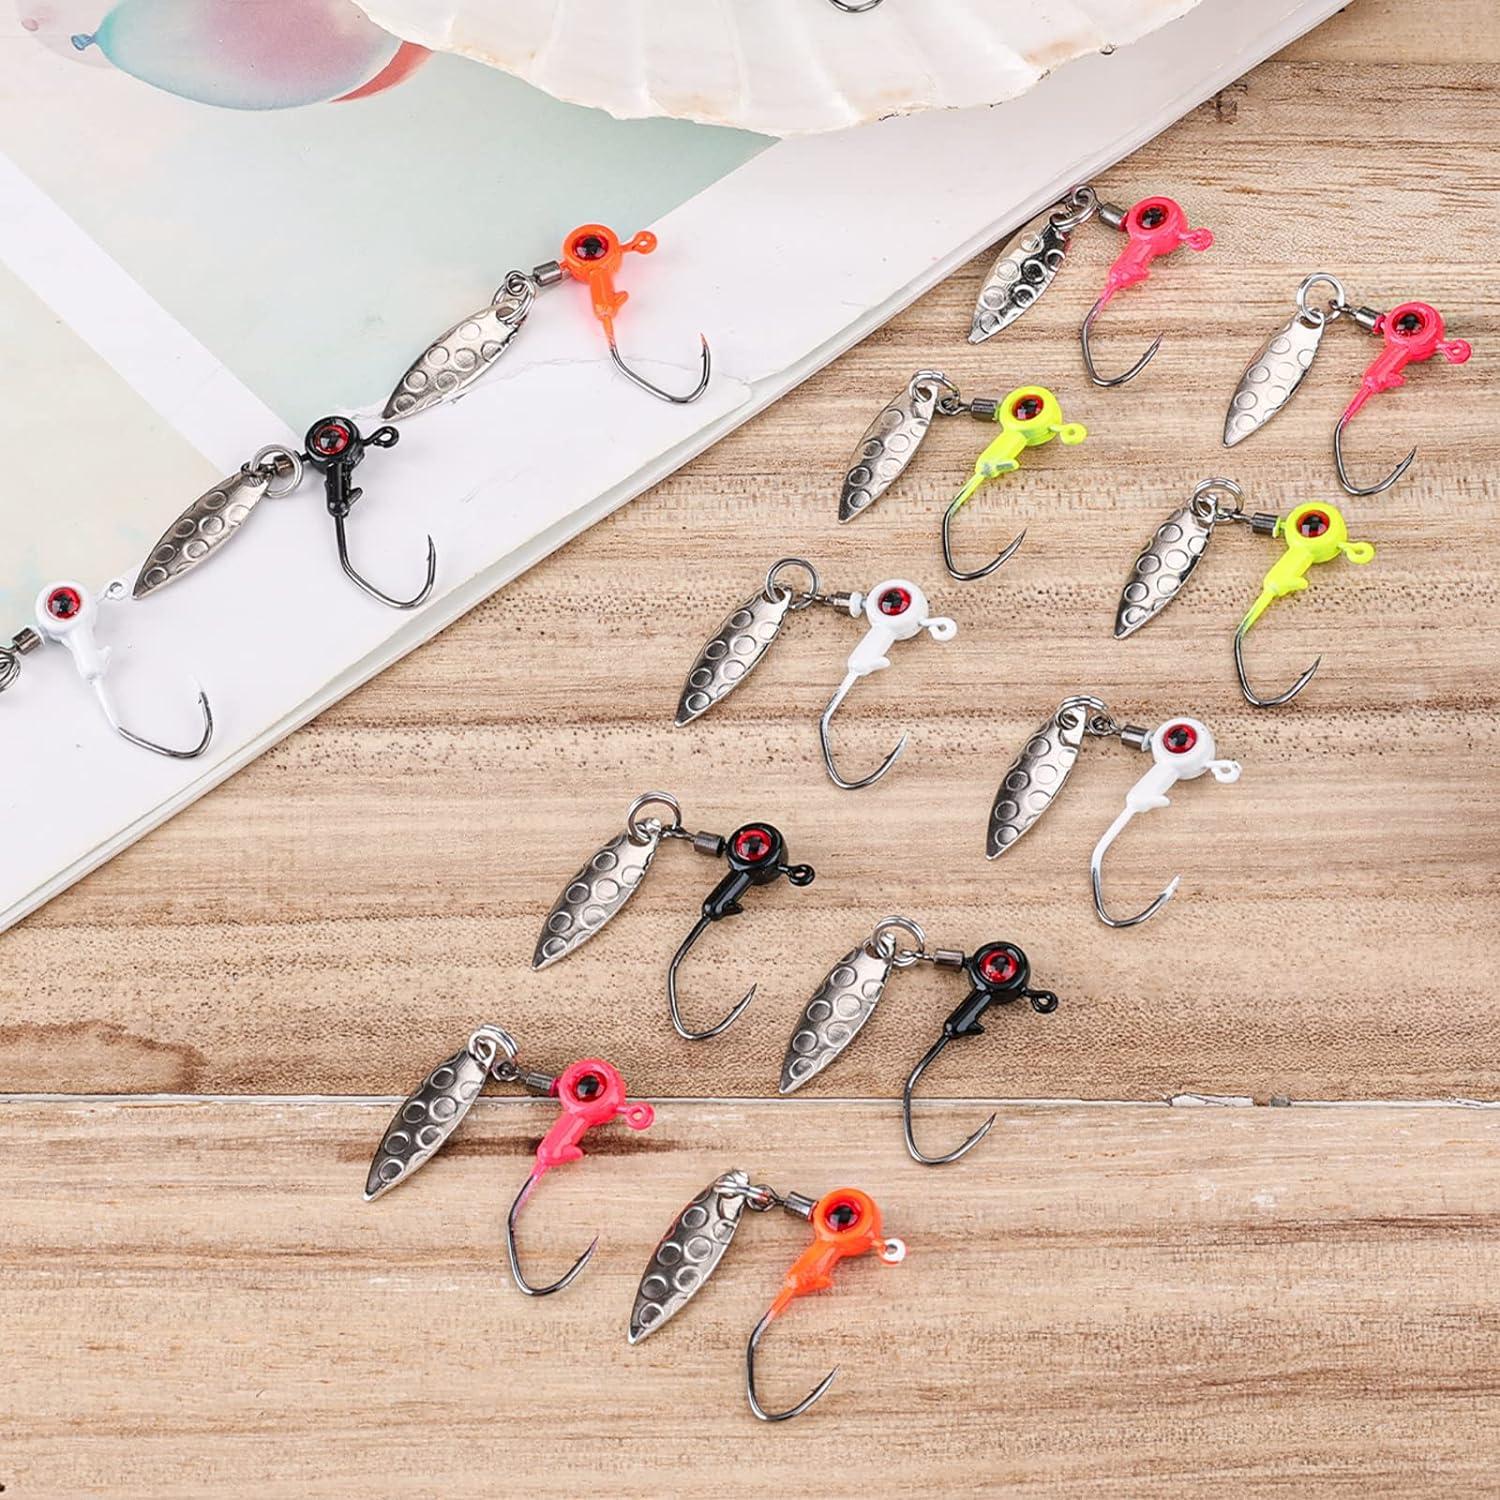 Savita 25pcs Fishing Jig Heads with Plastic Case High-Carbon Steel Fishing  Jig Head Hooks Set Fishing Lures Crappie Jigs for Bass Freshwater and  Saltwater Fishing Lovers (5 Colors) 1/32 oz